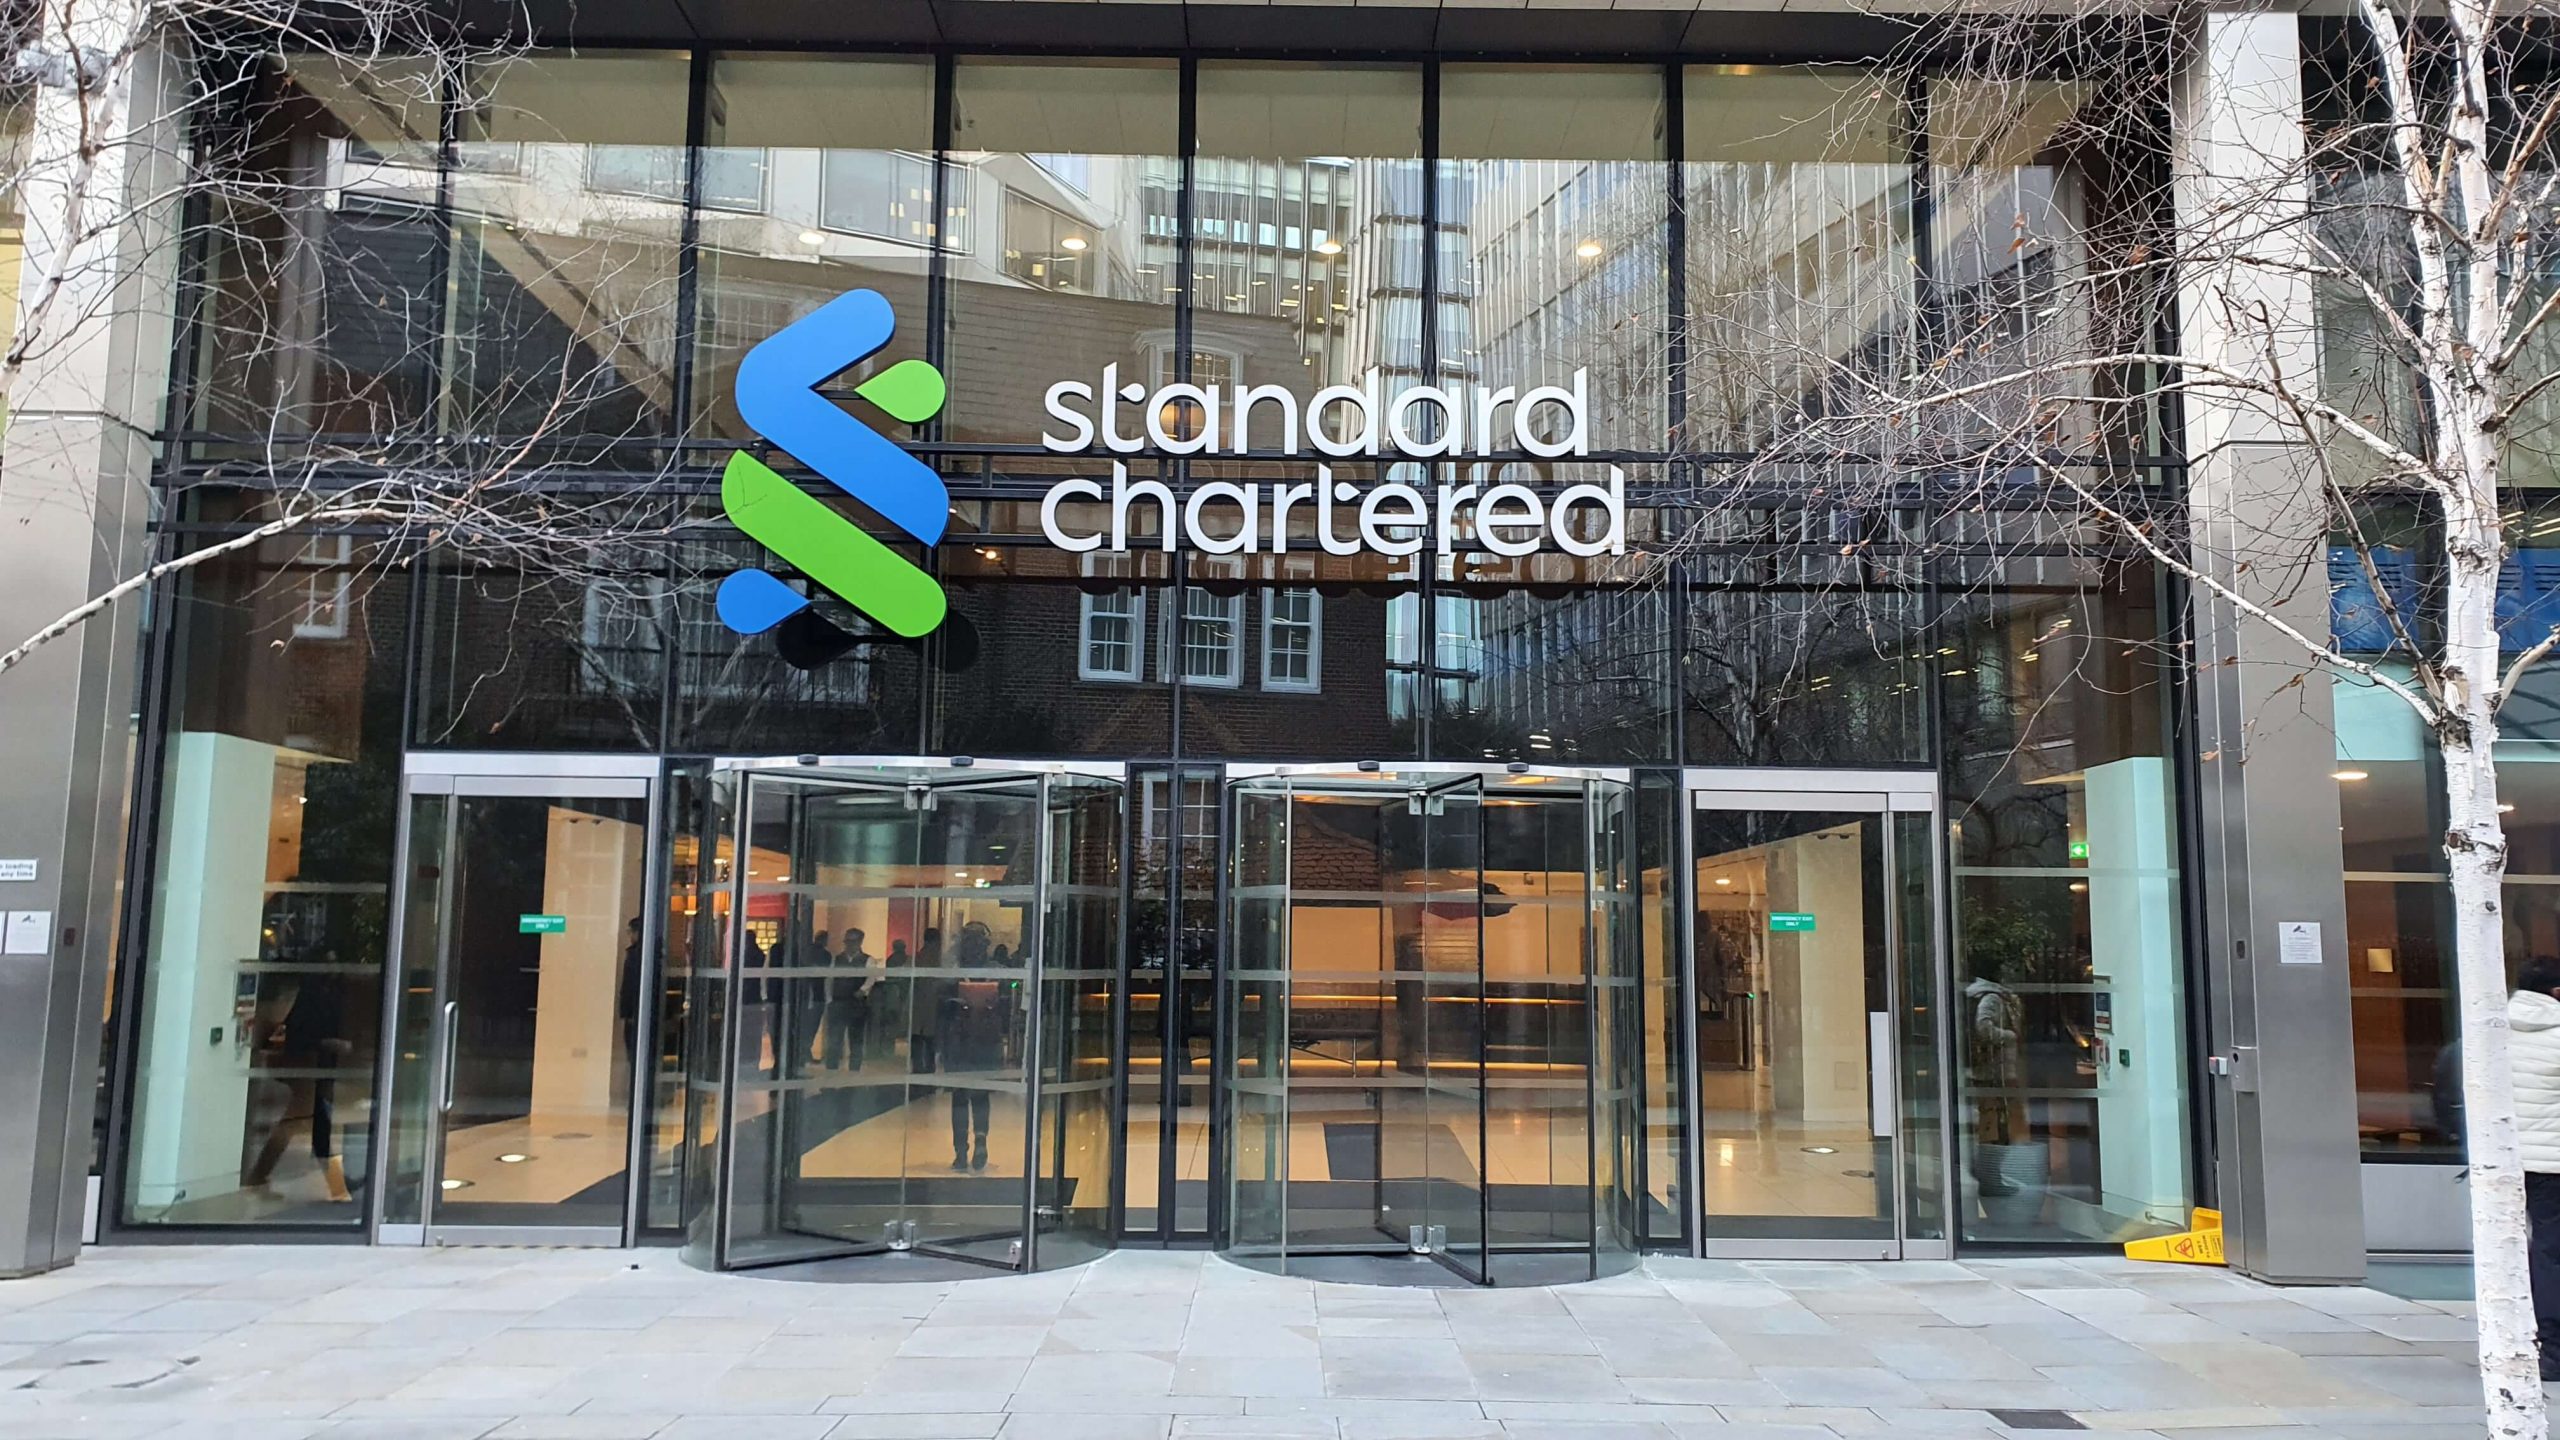 Standard chartered bank scaled